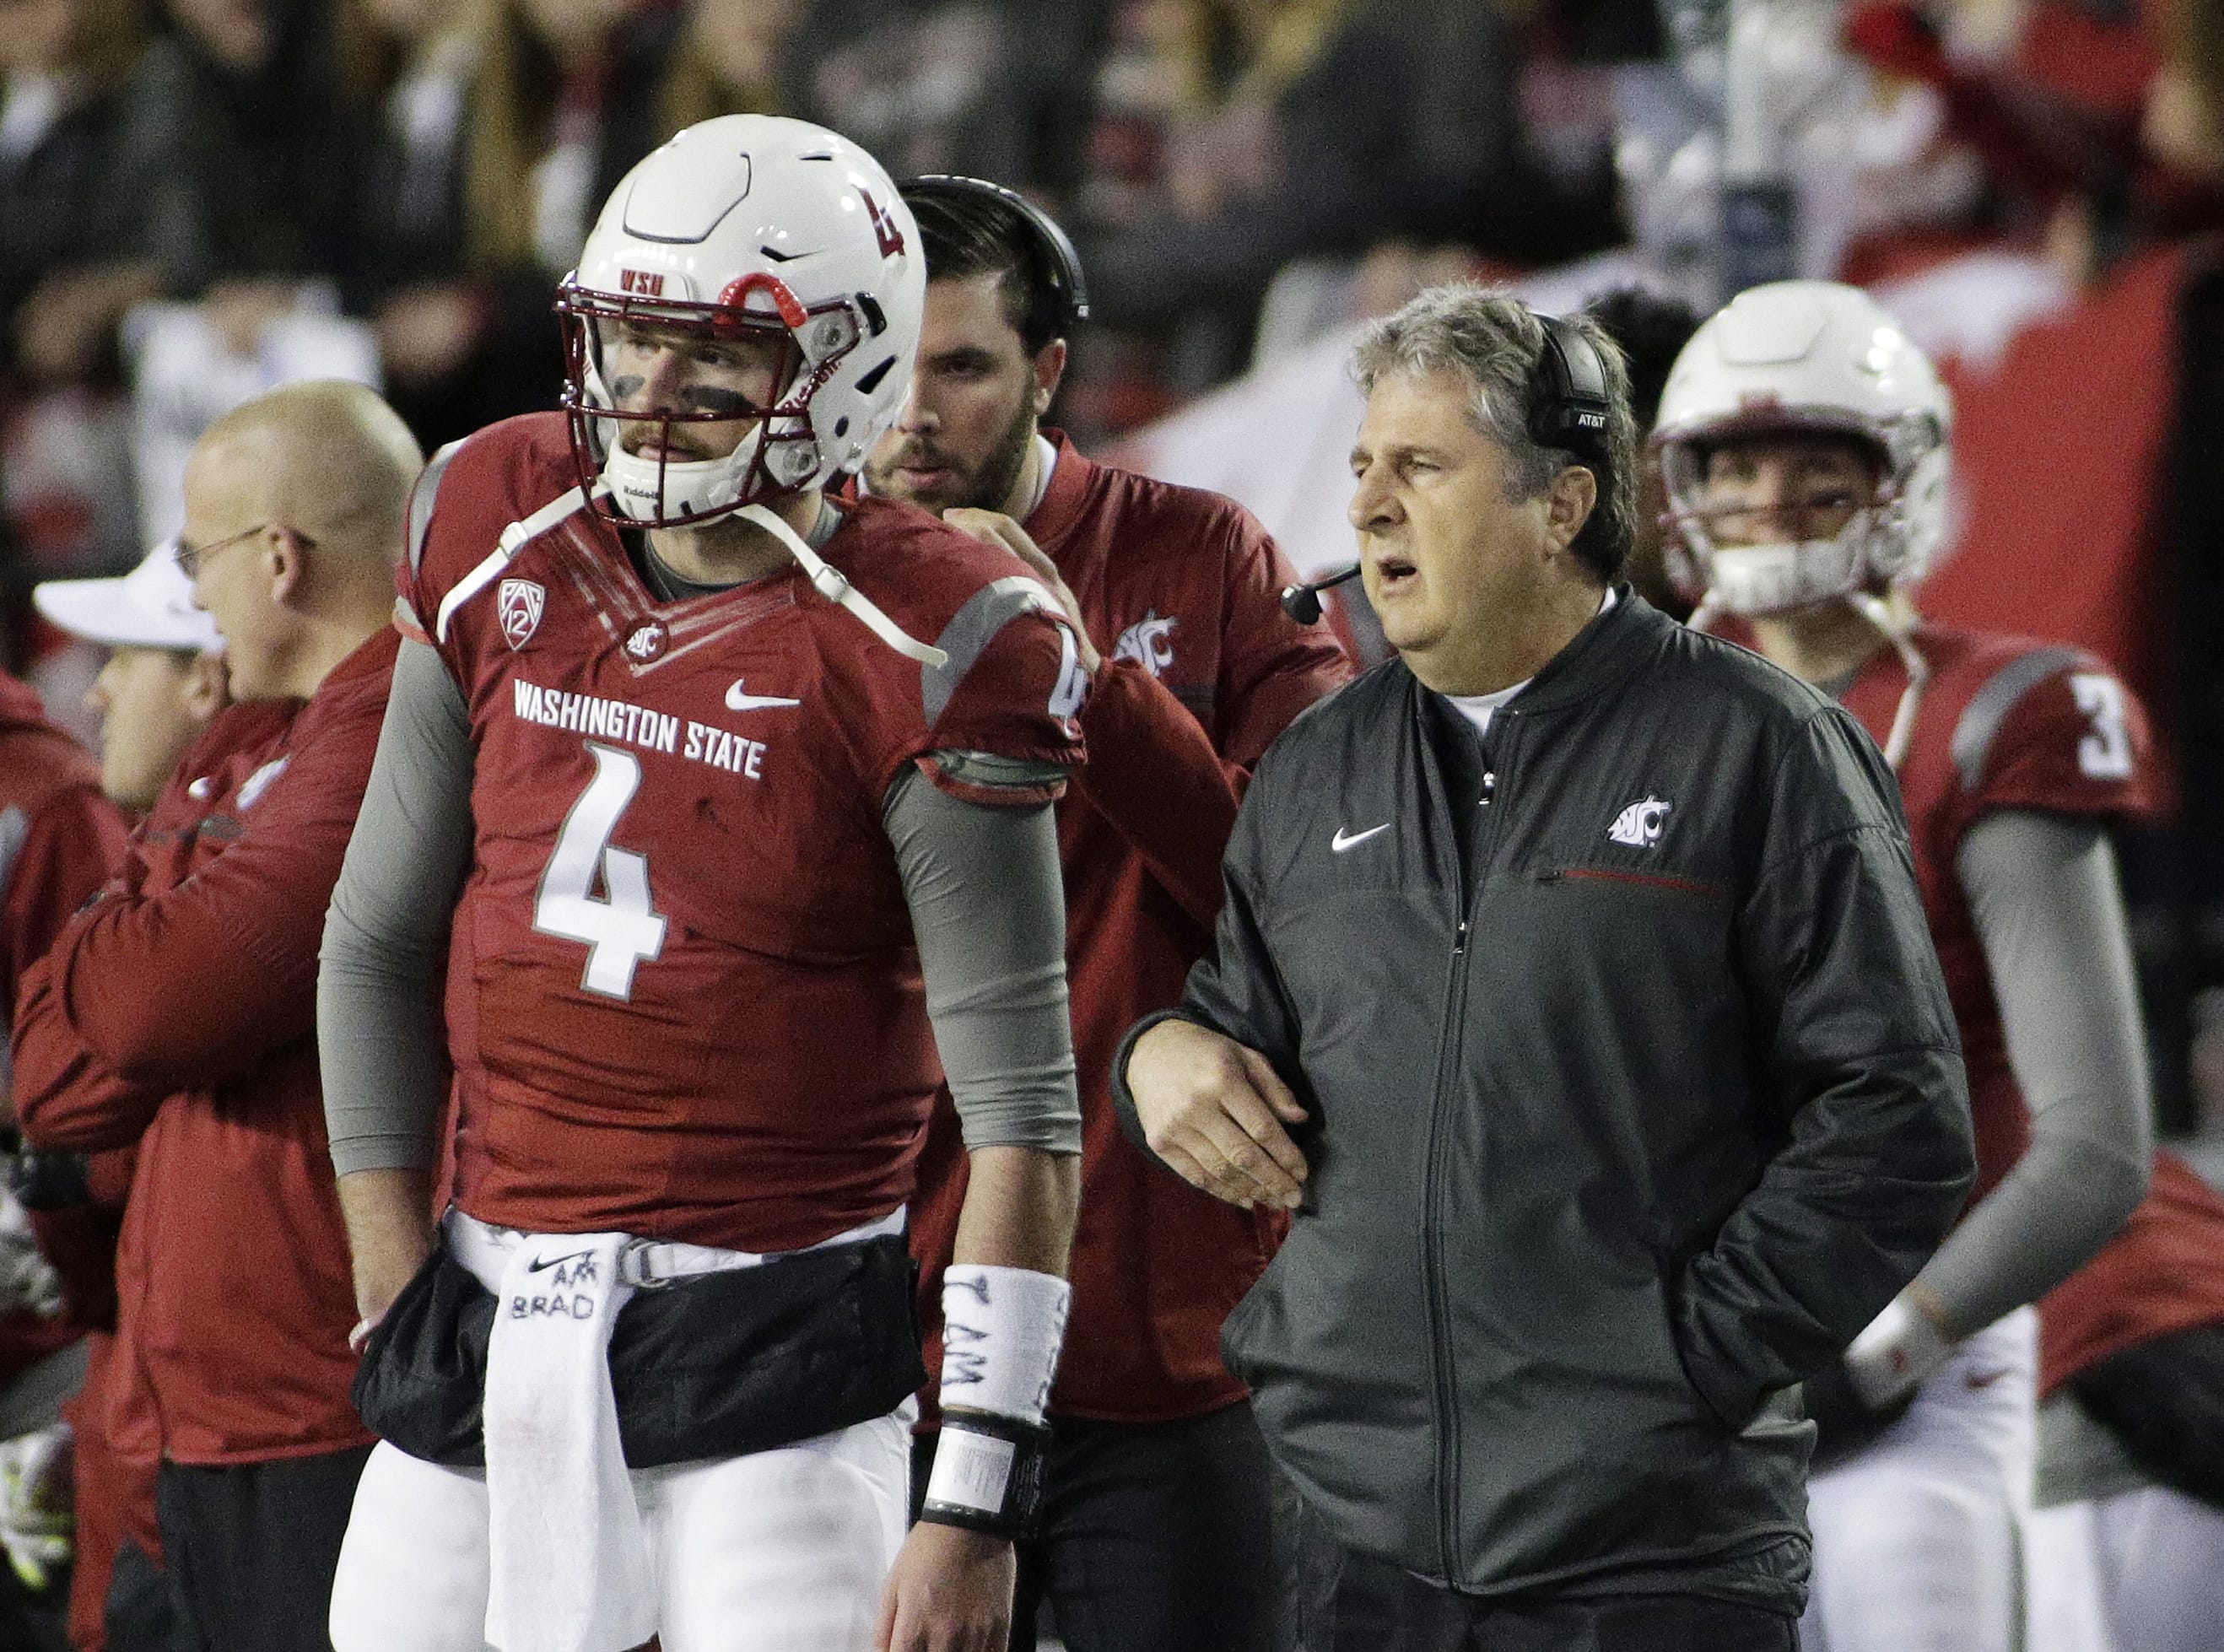 Washington State coach Mike Leach, right, speaks with quarterback Luke Falk (4) during the first half of an NCAA college football game against California in Pullman, Wash., Saturday, Nov. 12, 2016.